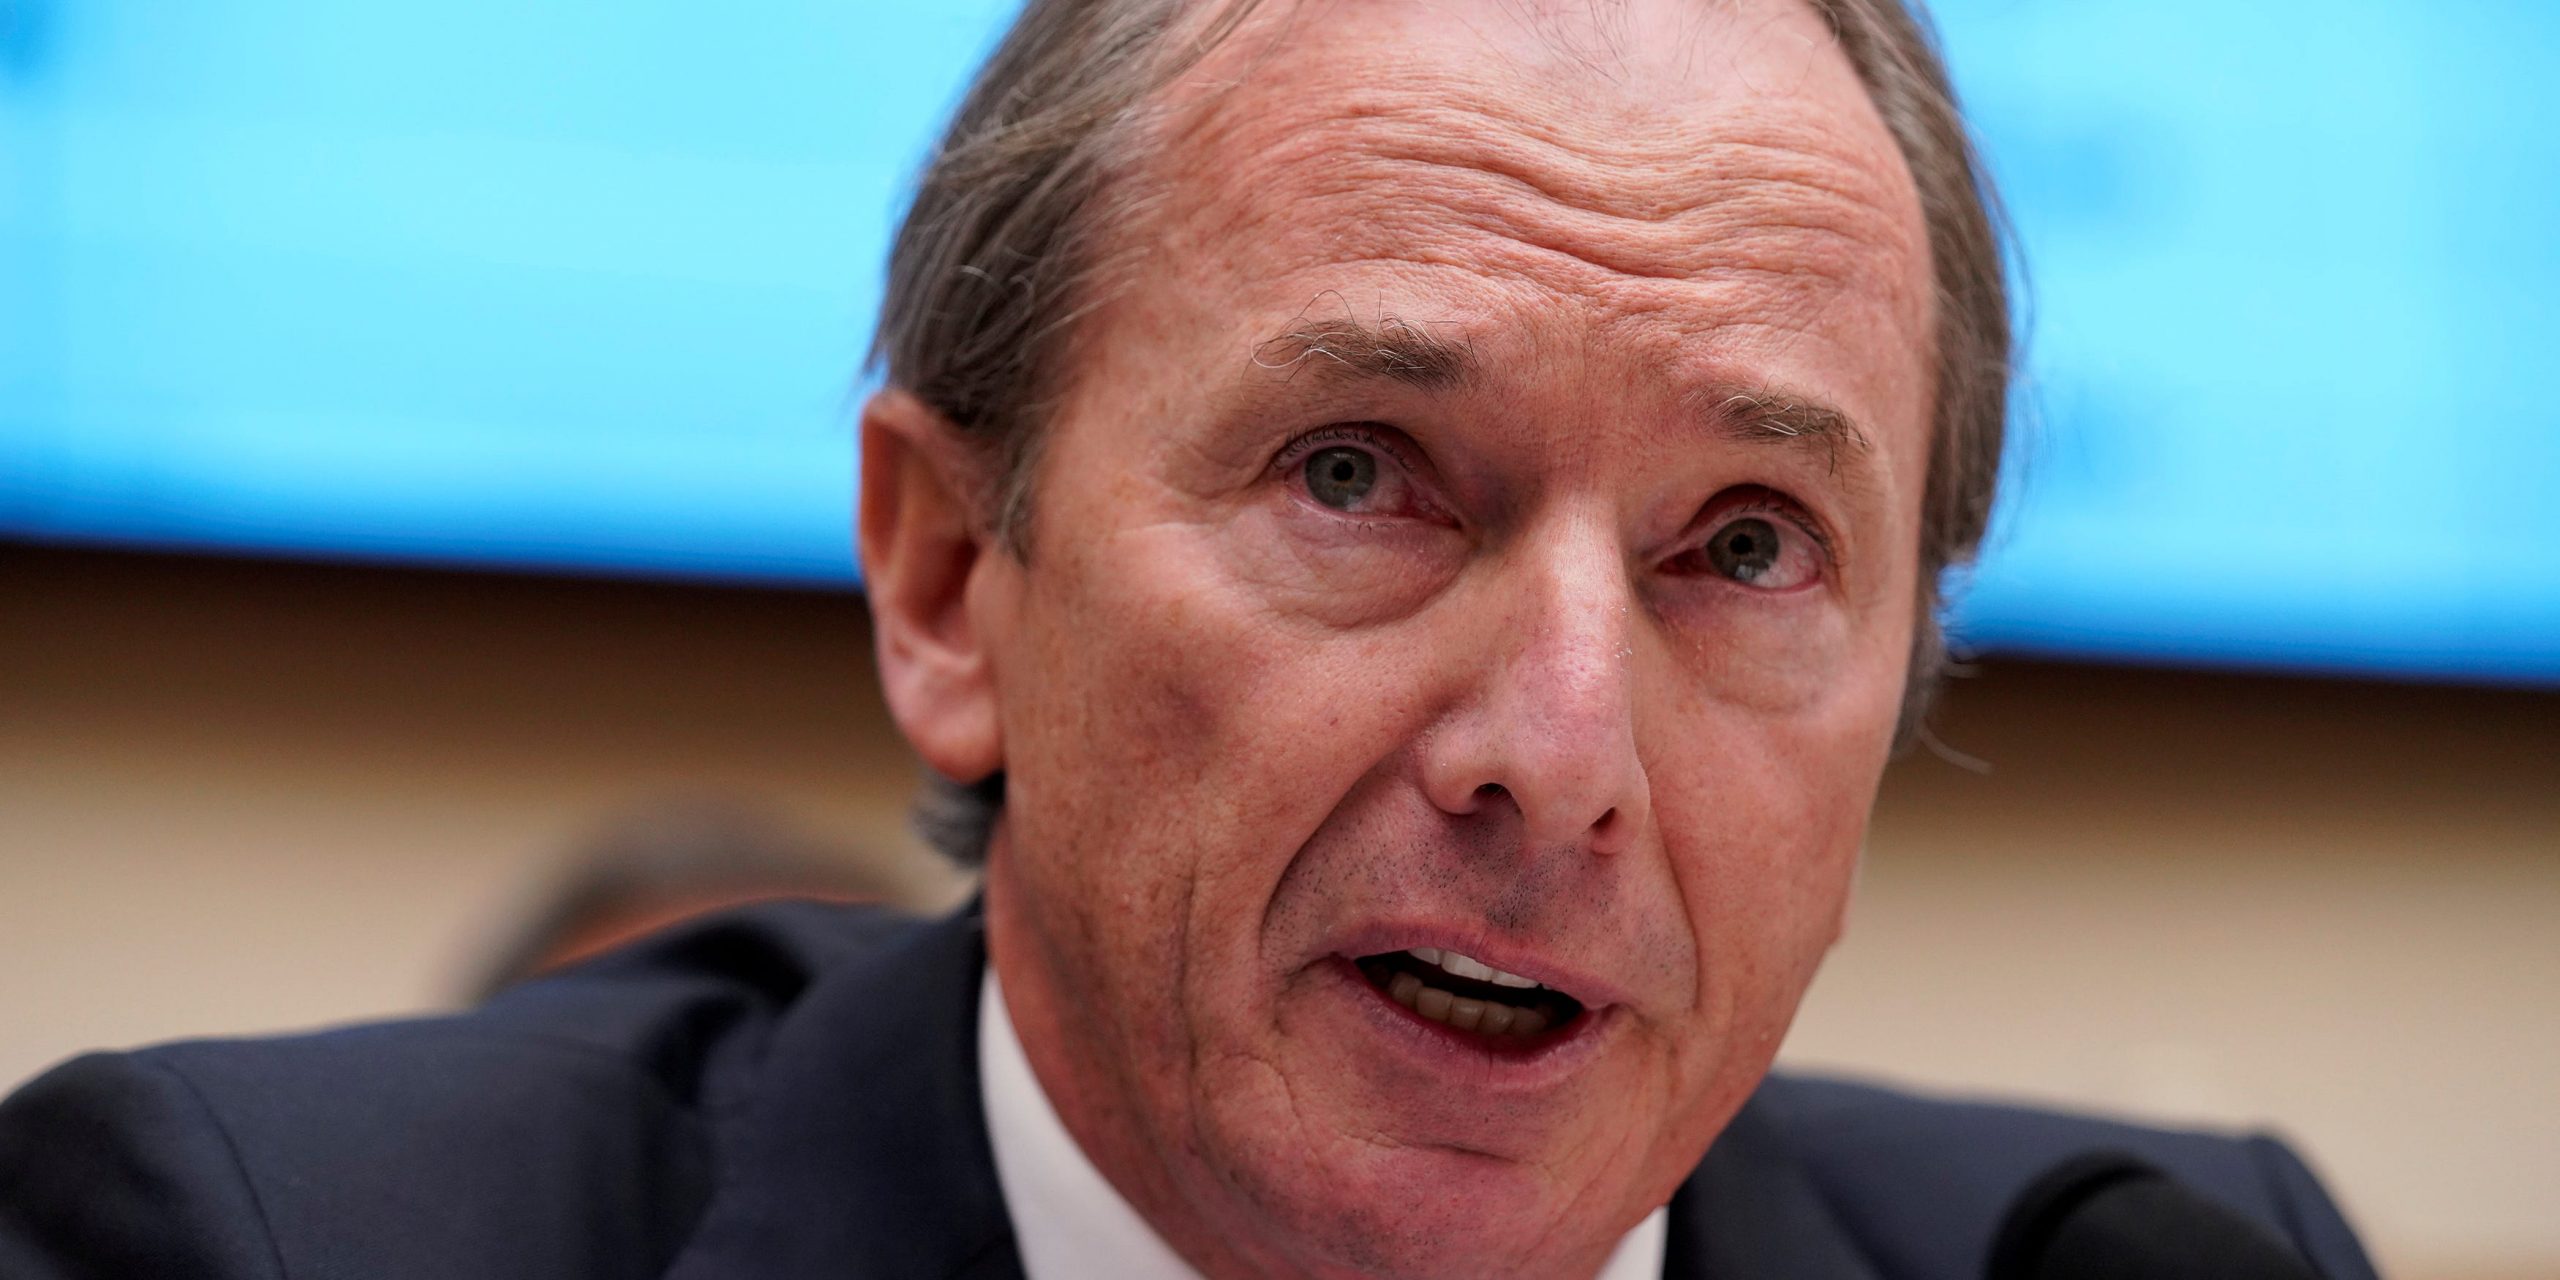 FILE PHOTO: James P. Gorman, chairman & CEO of Morgan Stanley, testifies before a House Financial Services Committeeon Capitol Hill in Washington, U.S., April 10, 2019. REUTERS/Aaron P. Bernstein